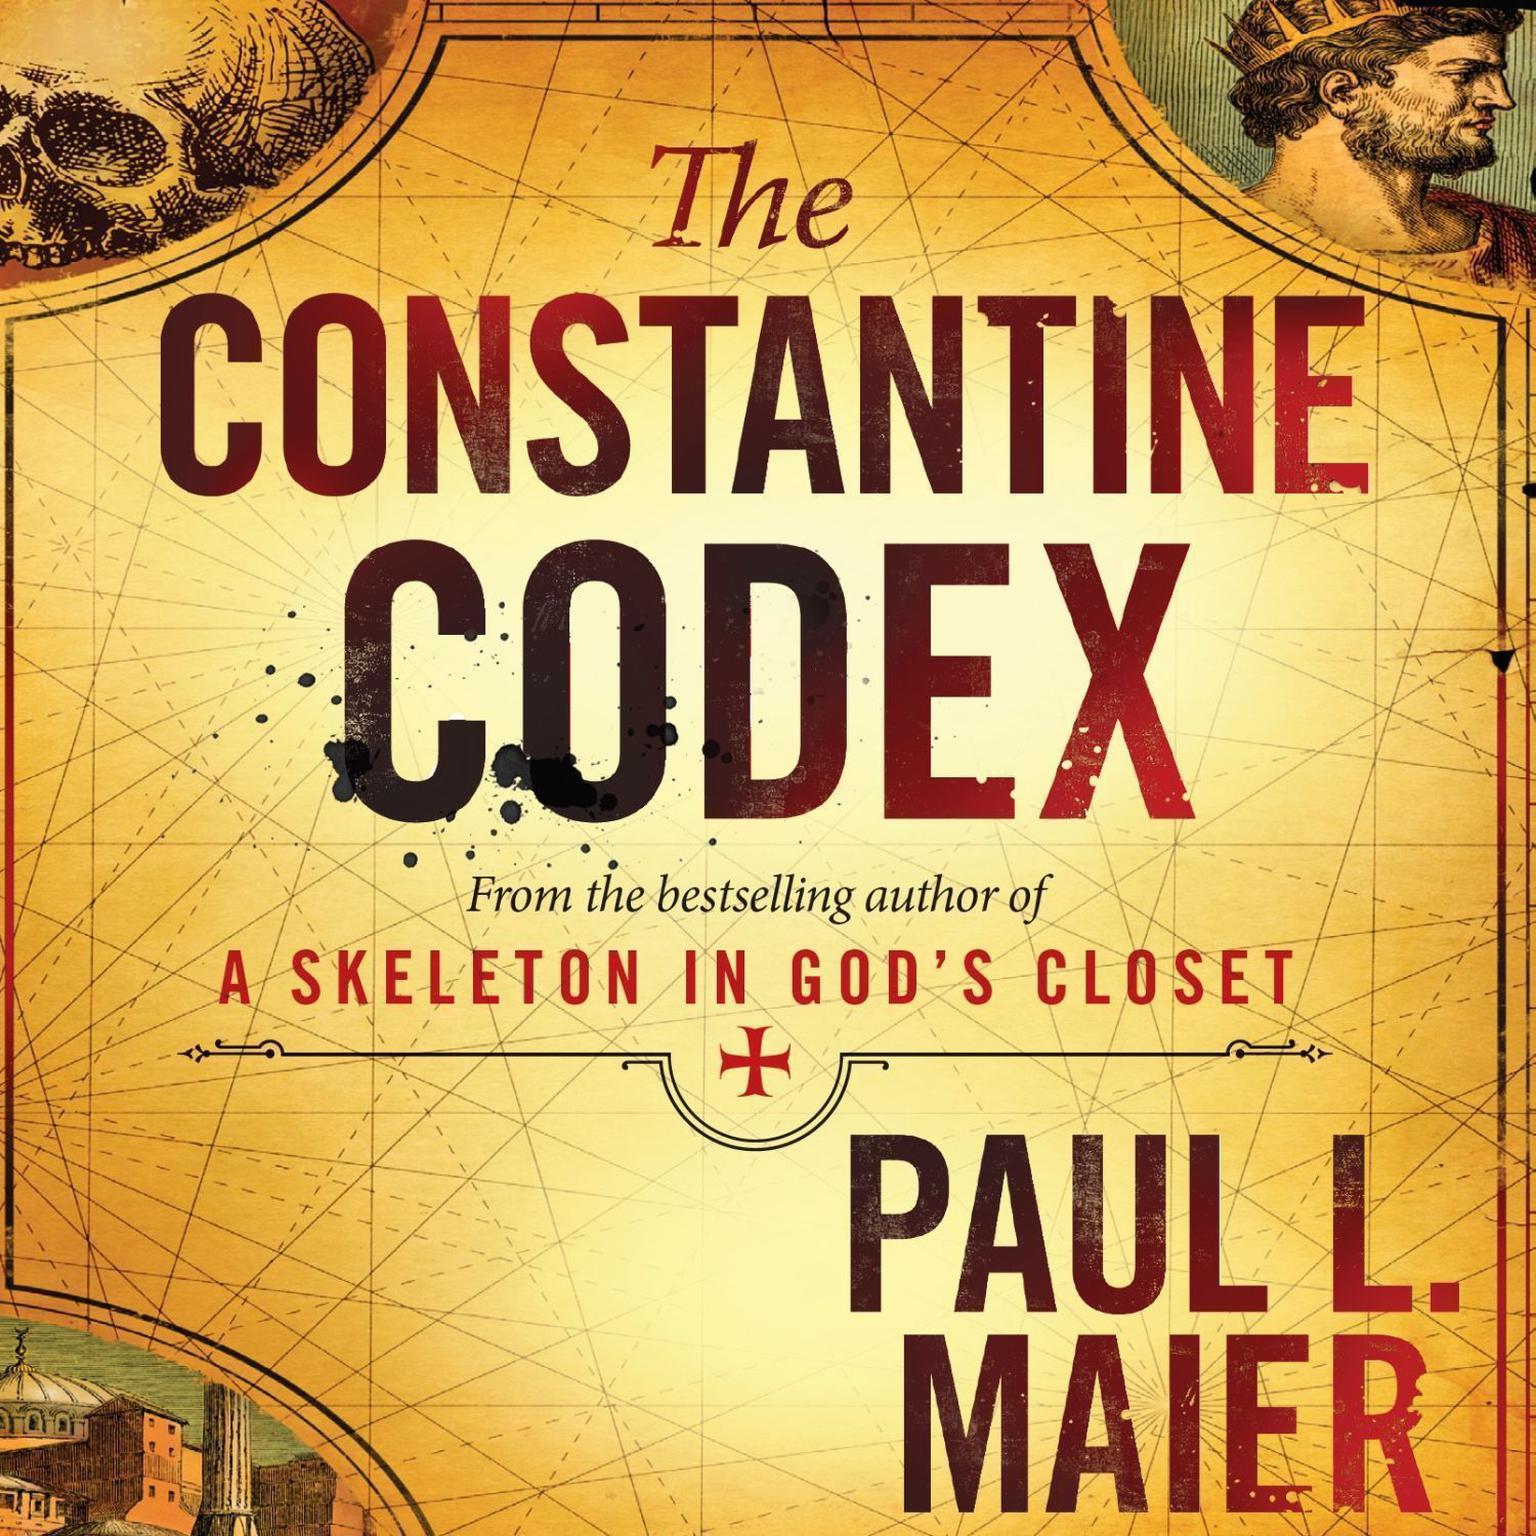 The Constantine Codex Audiobook, by Paul L. Maier